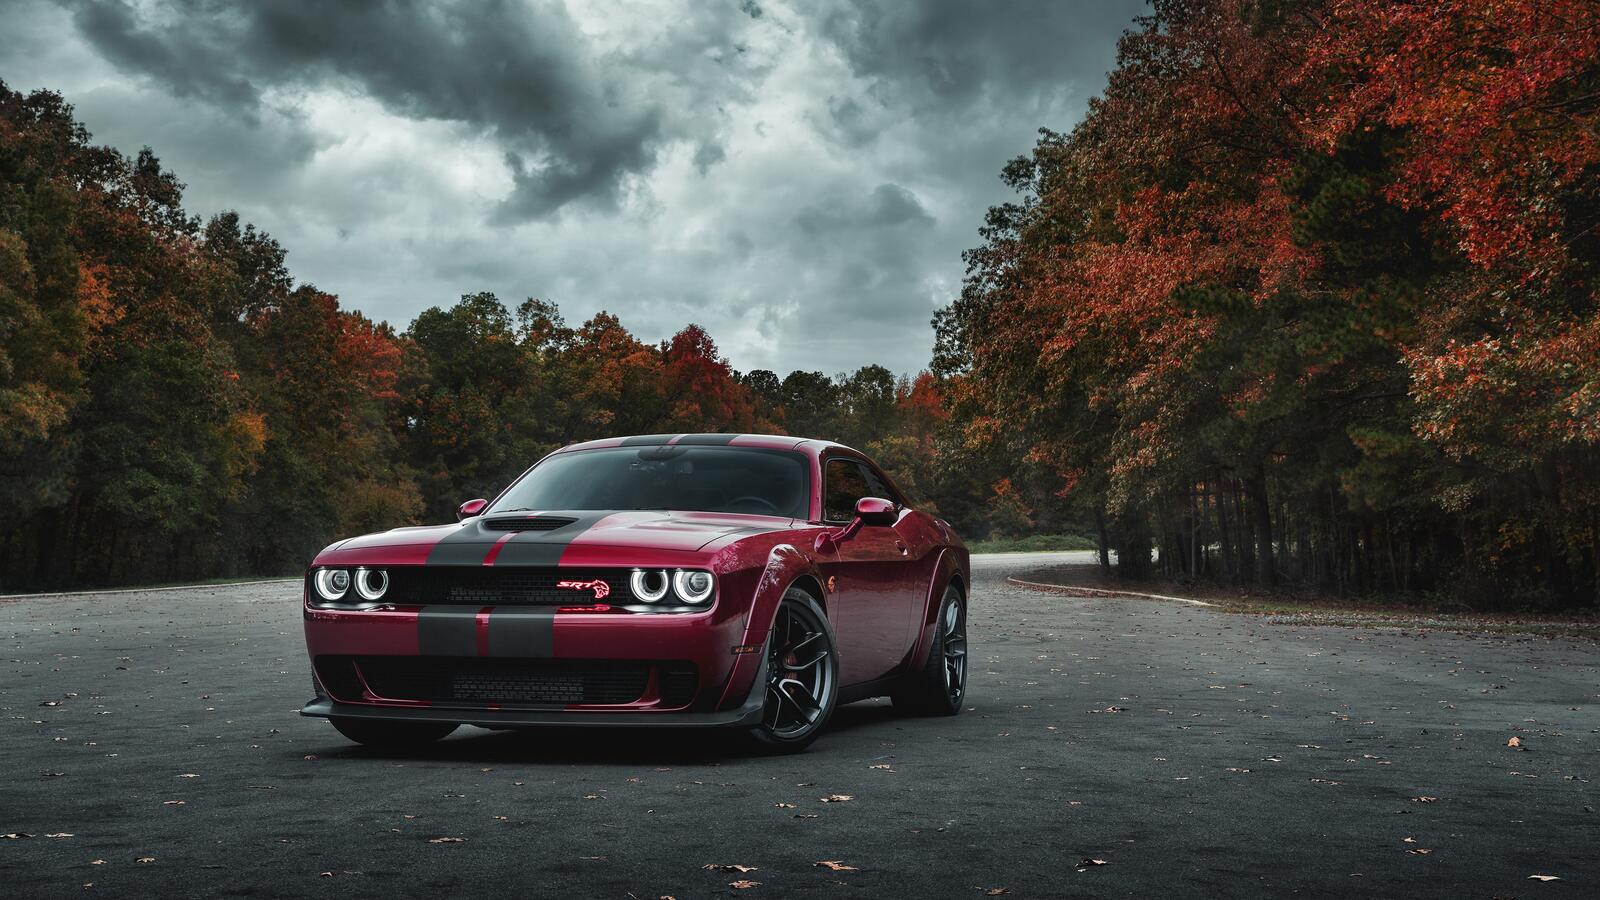 Free photo A burgundy Dodge Challenger with black stripes.